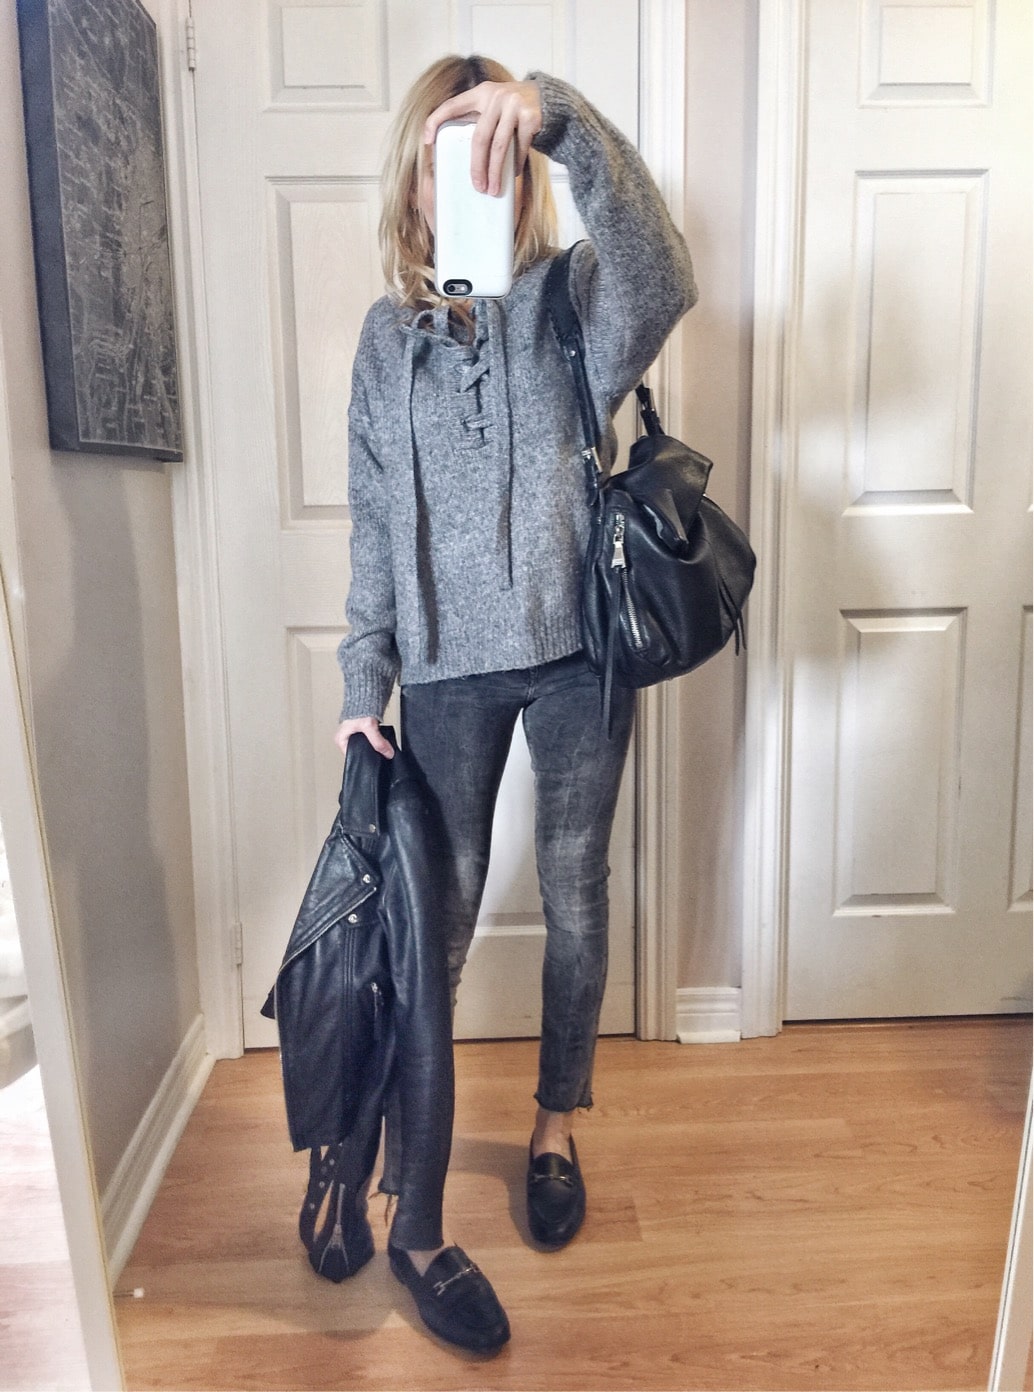 Grey lace front sweater | Grey jeans | Leather jacket | sam Edelman loraine loafers |